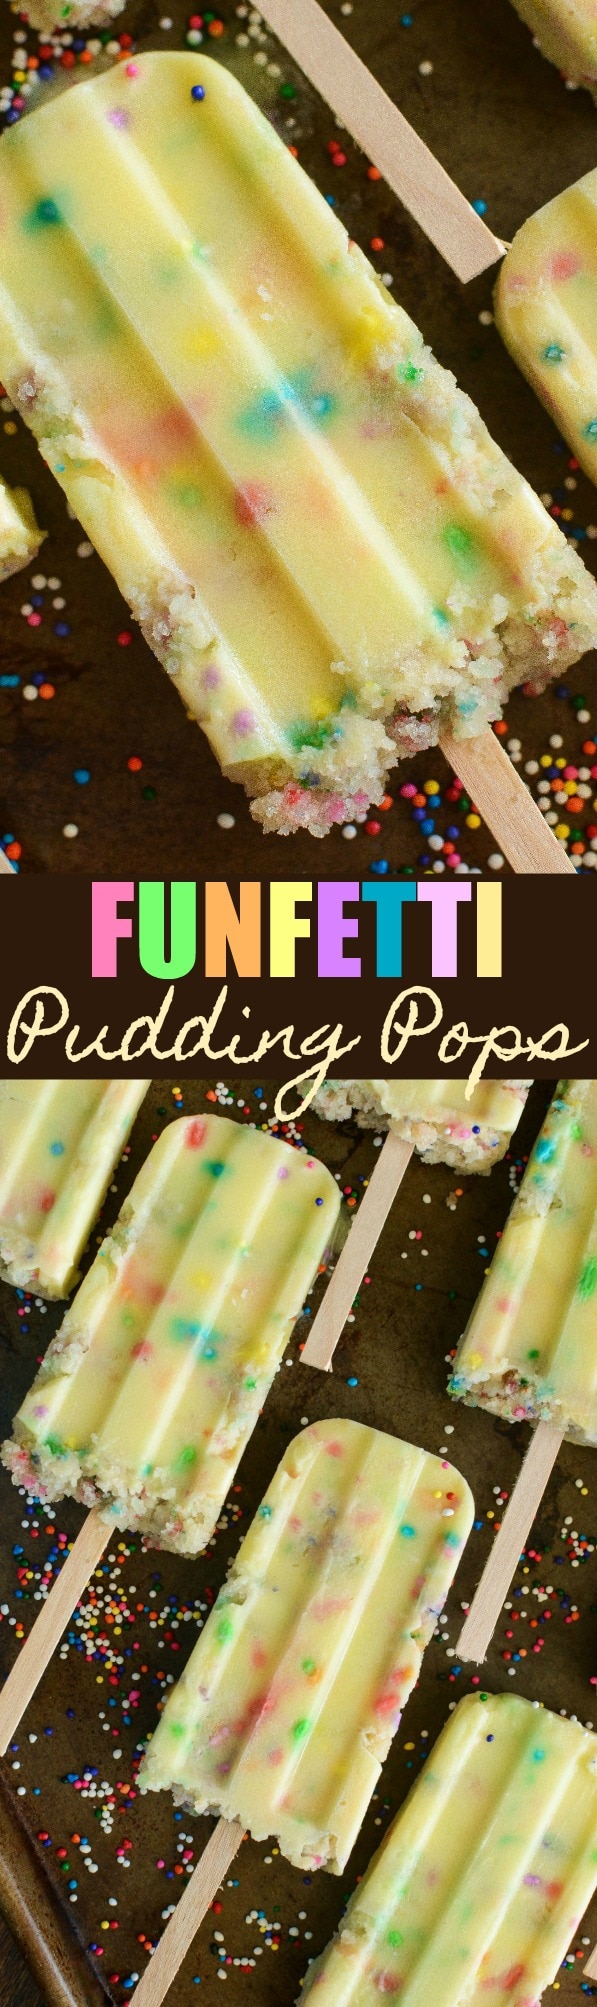 A Collage of Two Images of Funfetti Cake Pudding Pops